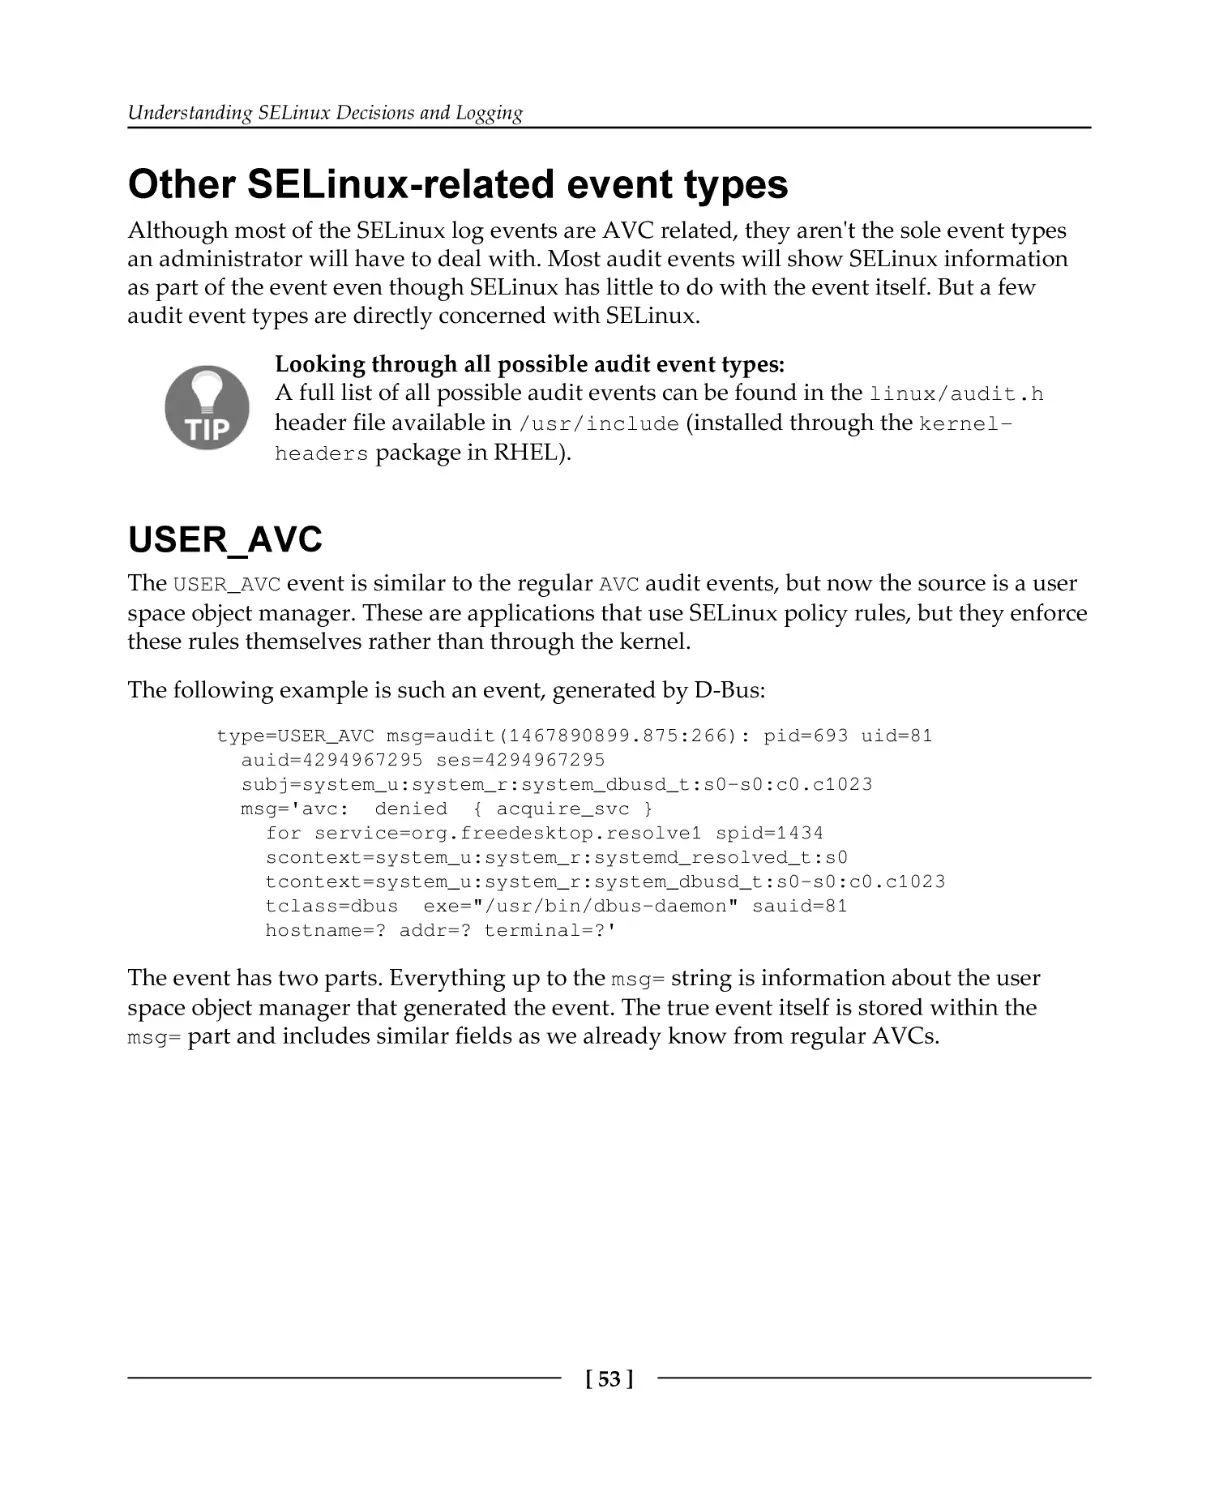 Other SELinux-related event types
USER_AVC